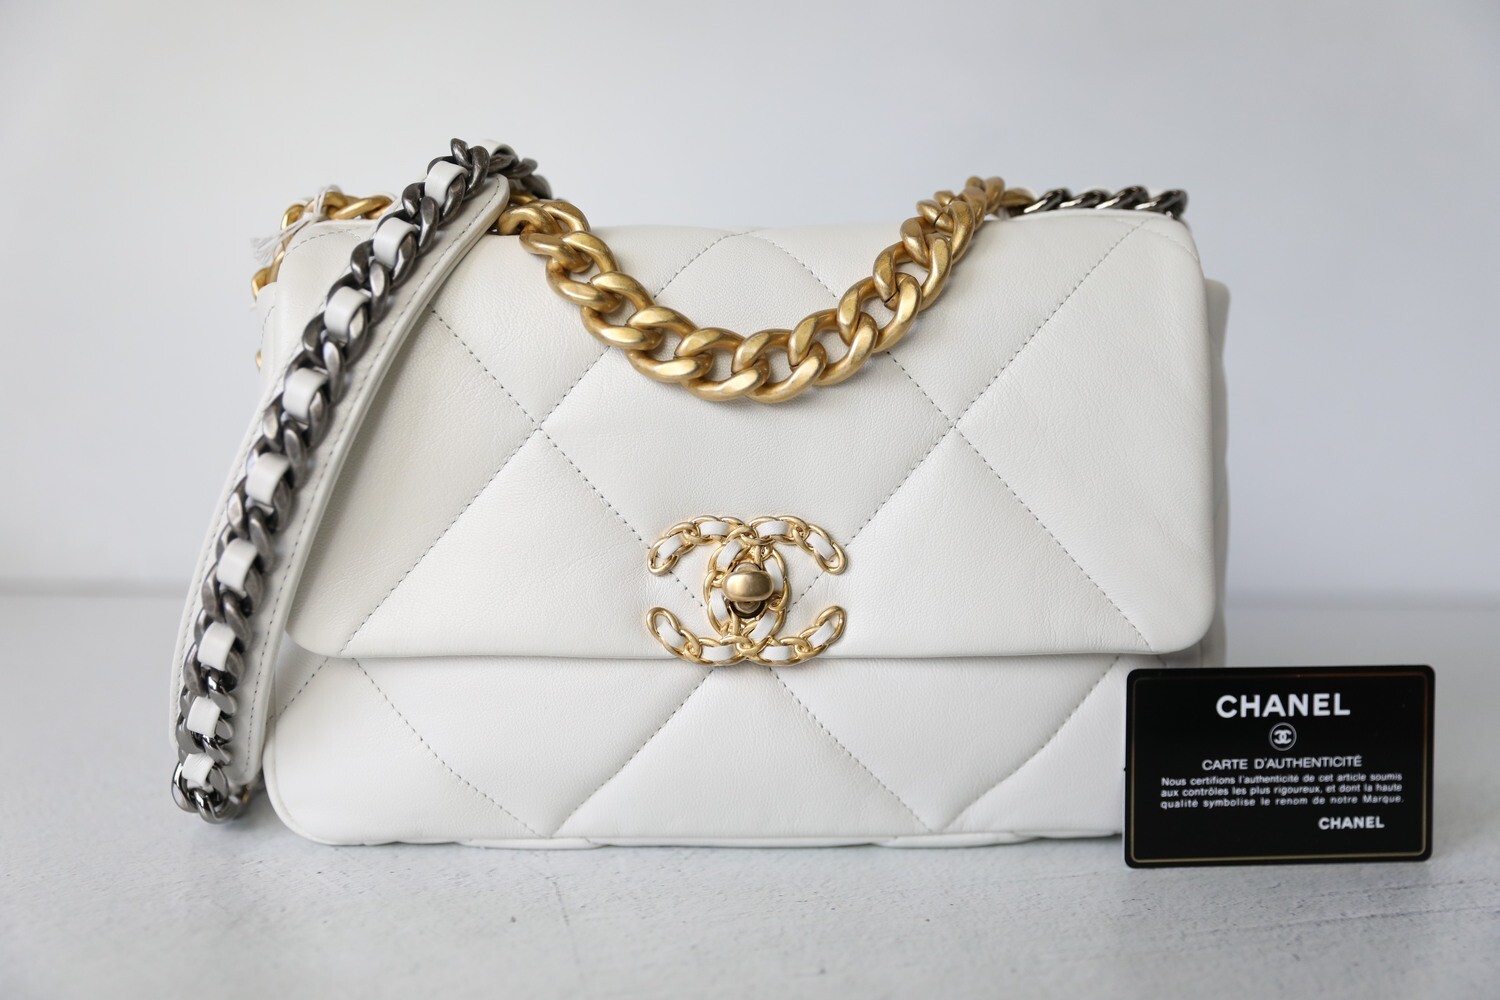 Chanel 22 Small, White Leather, Gold Hardware, Preowned No